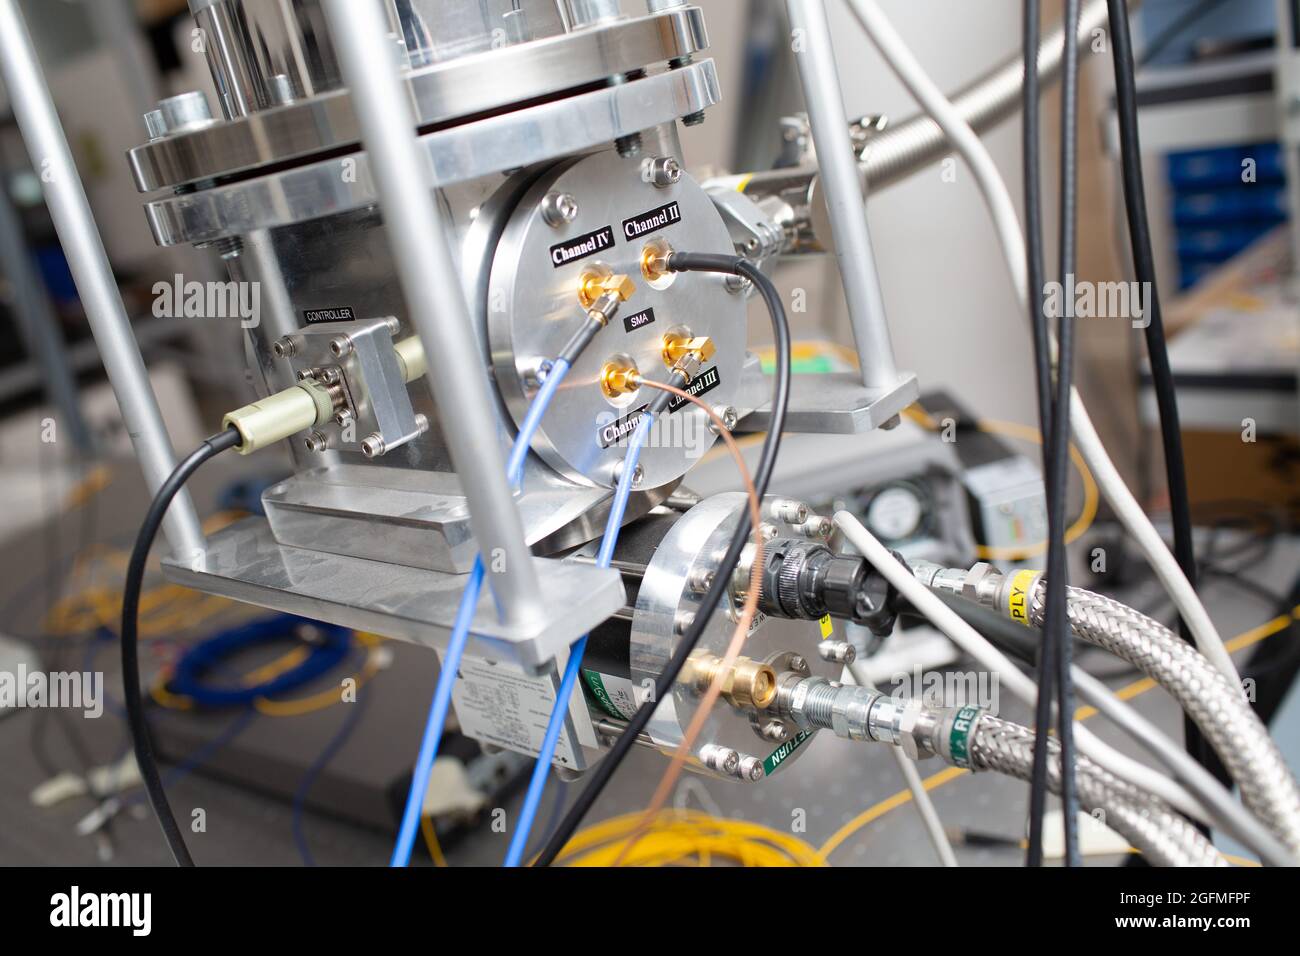 Single photon detector at scientific laboratory without people. Stock Photo